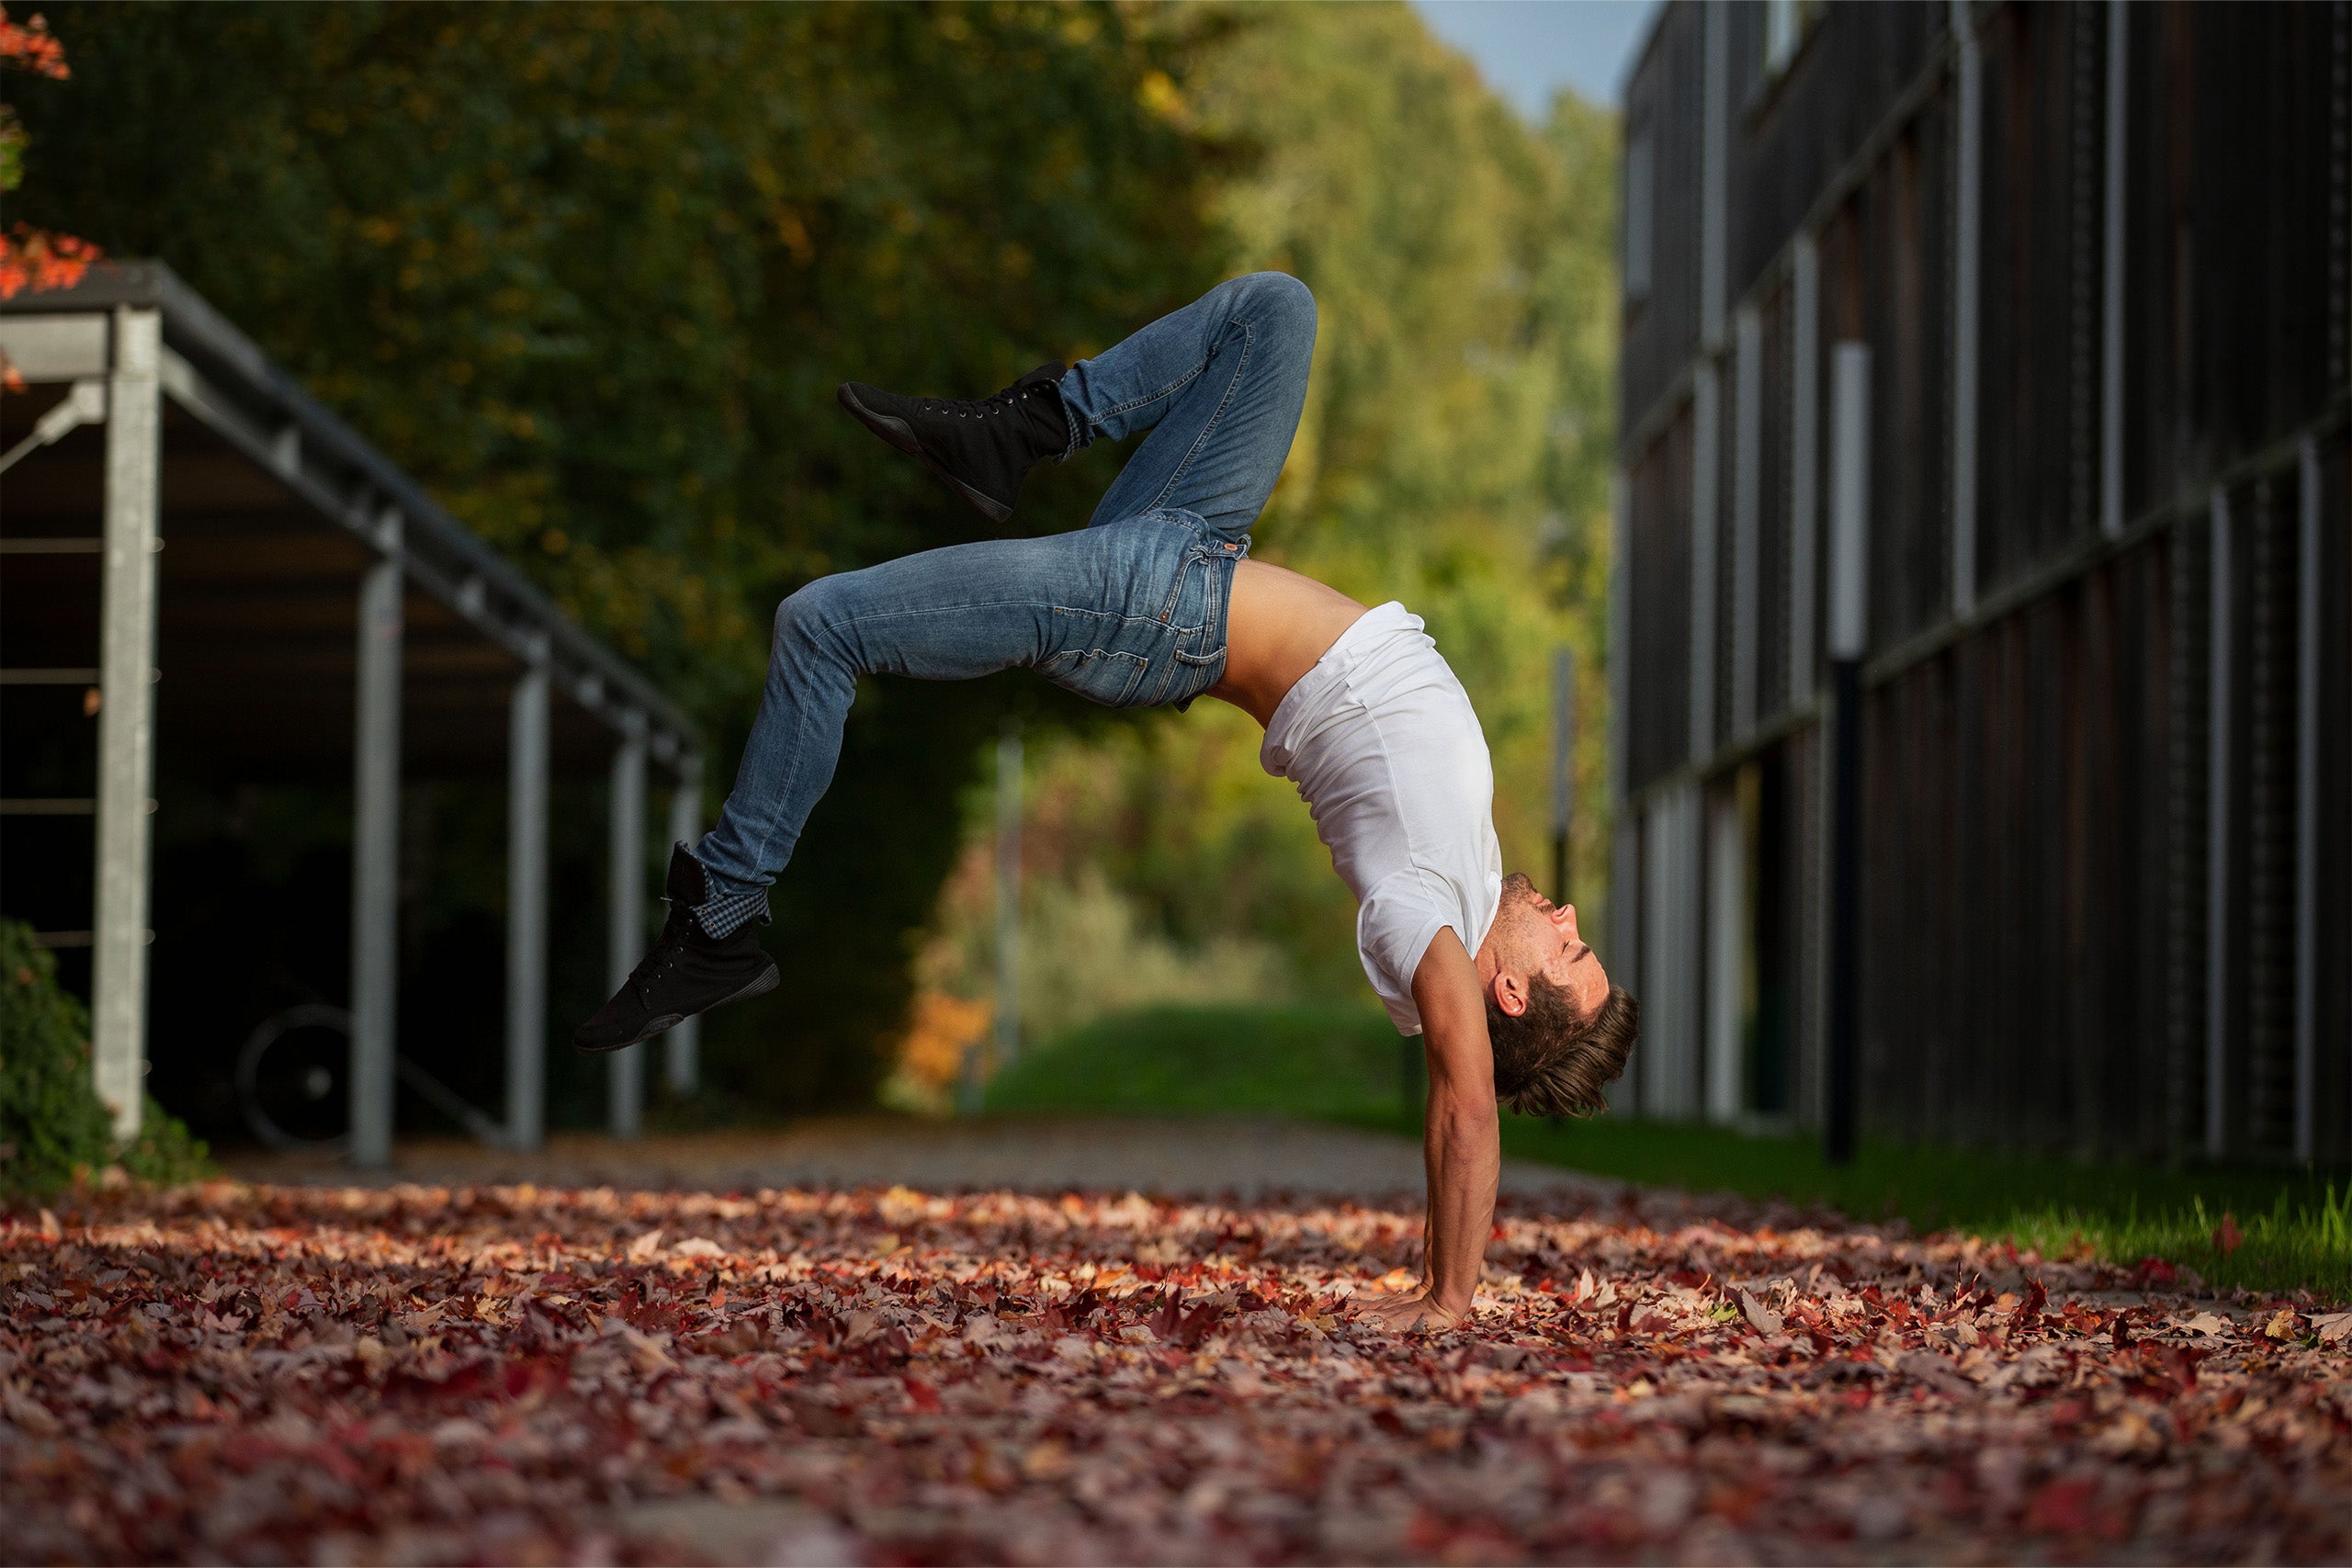 A person in jeans and white T-shirt is doing an acrobatic exercise outdoors, hands on the leaf-covered ground, legs in the air. On her feet she wears Wildling Shoes minimal shoes.